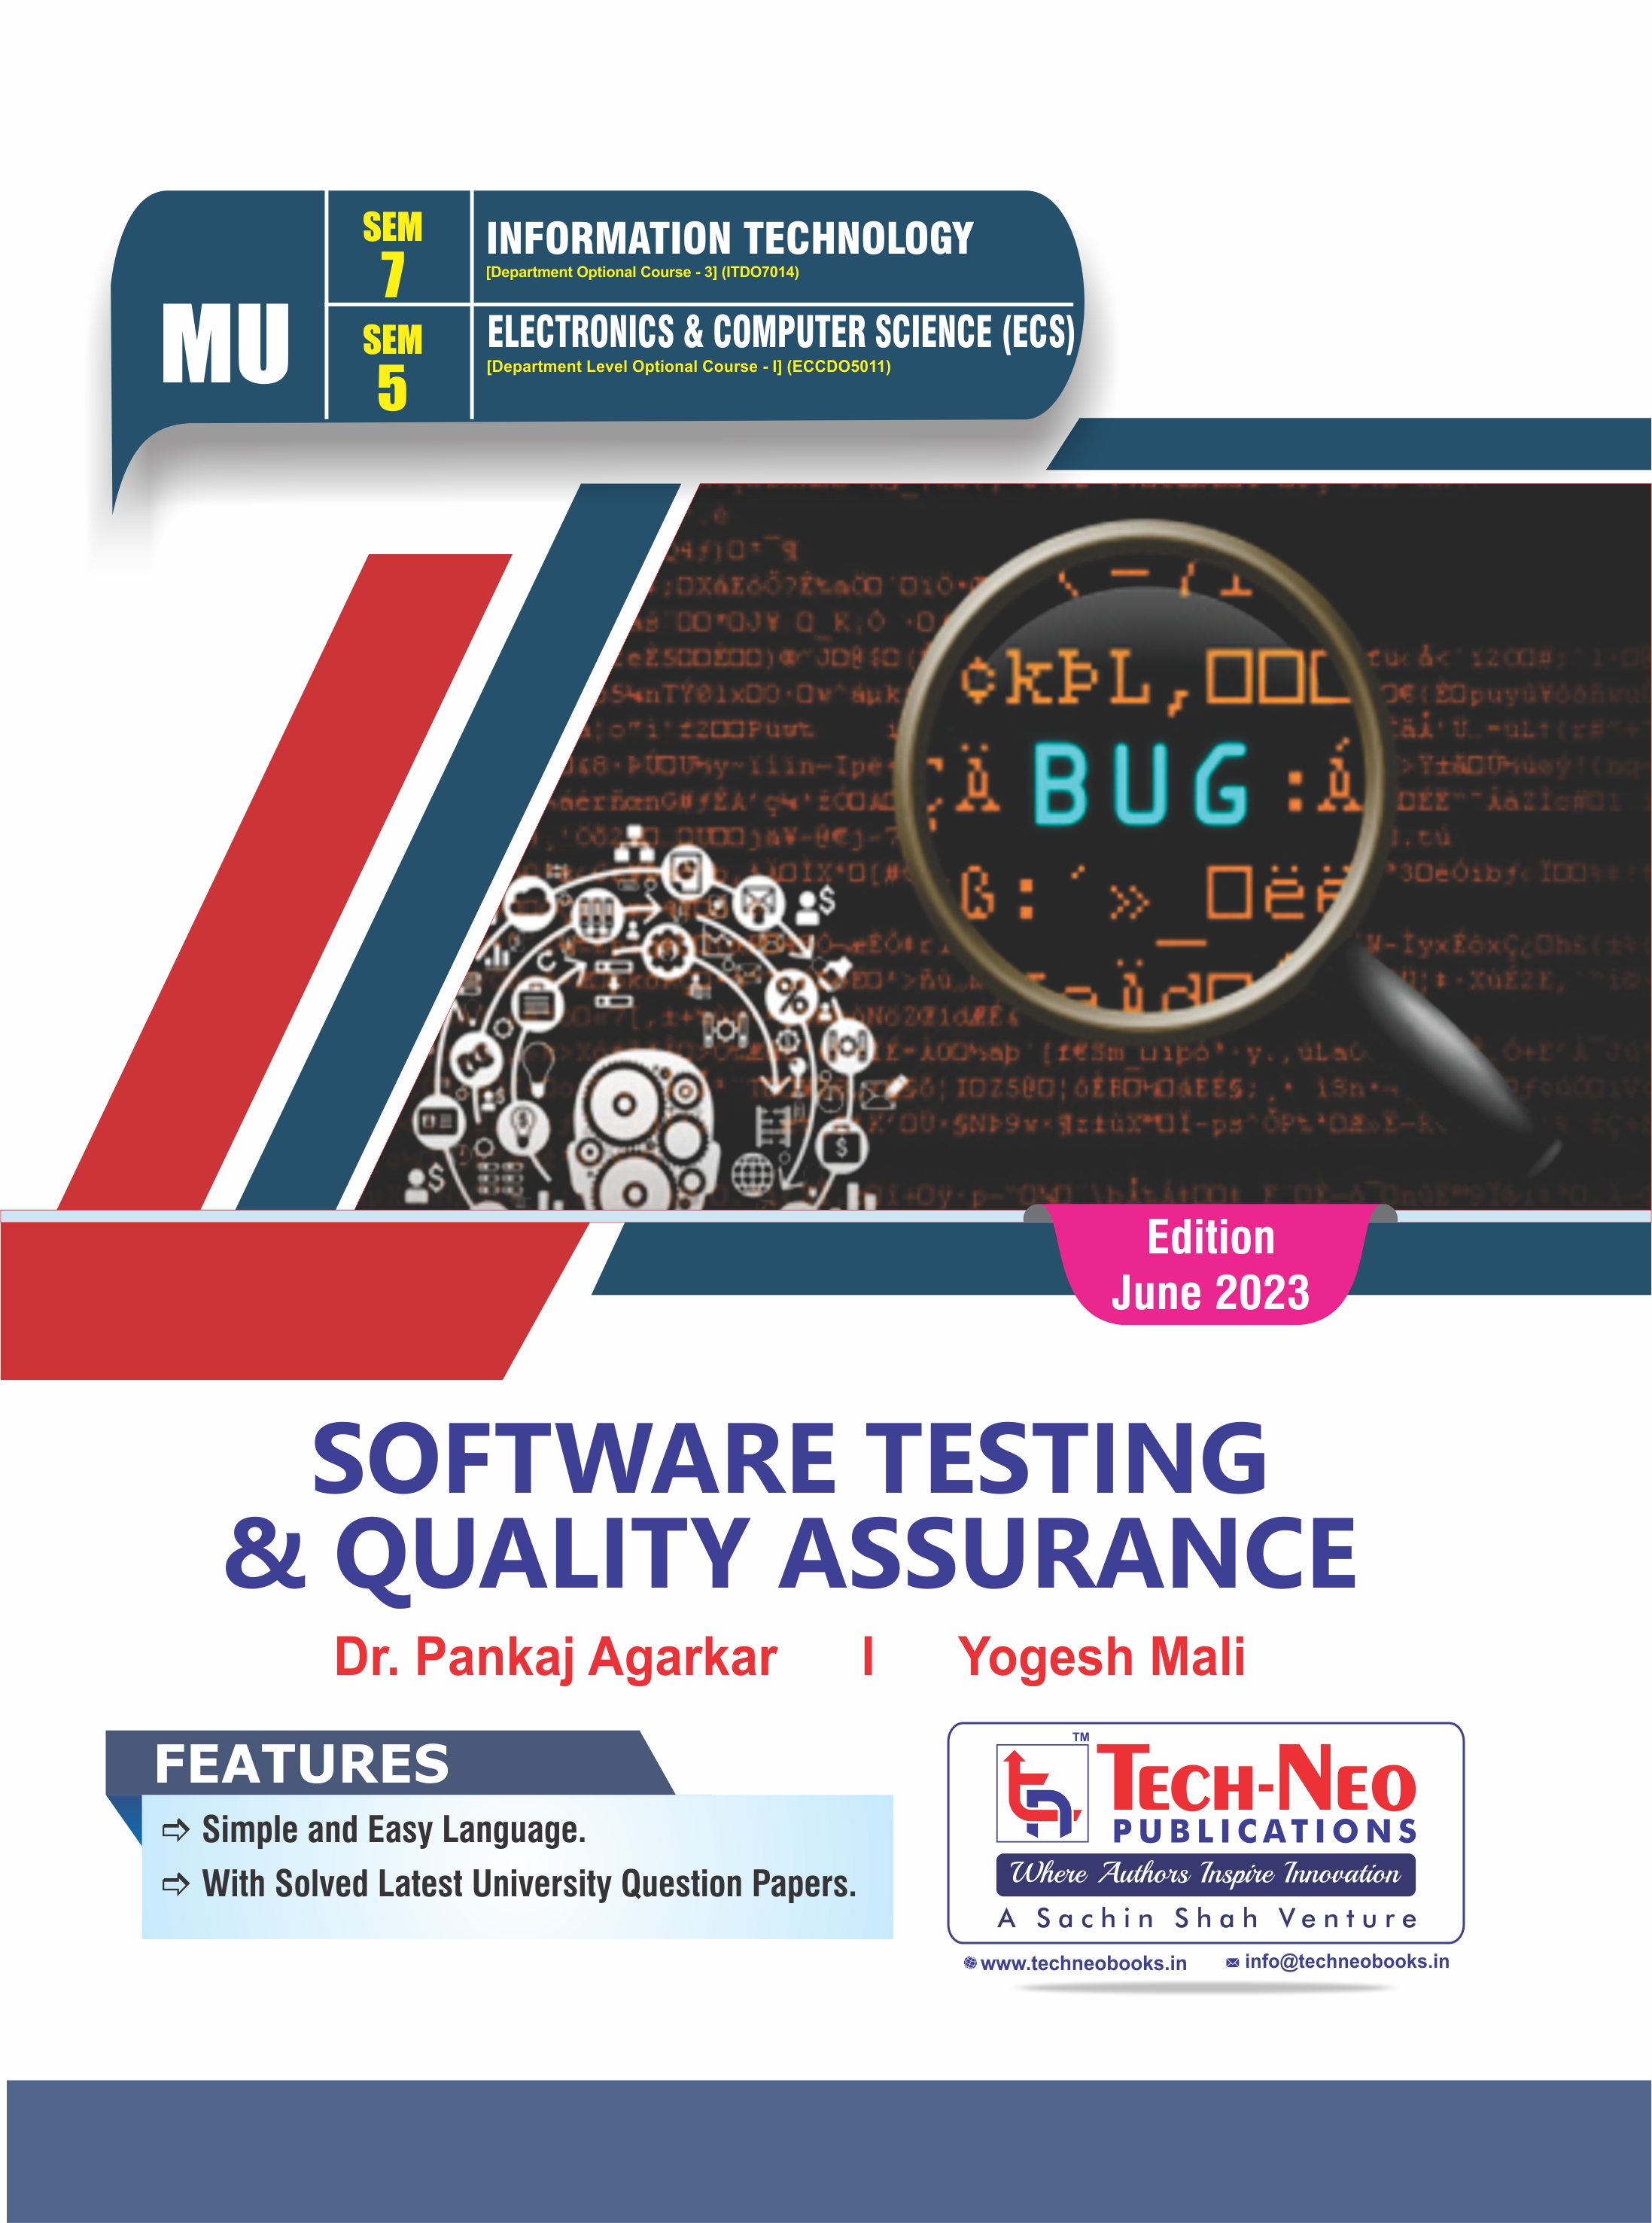 Software Testing & Quality Assurance